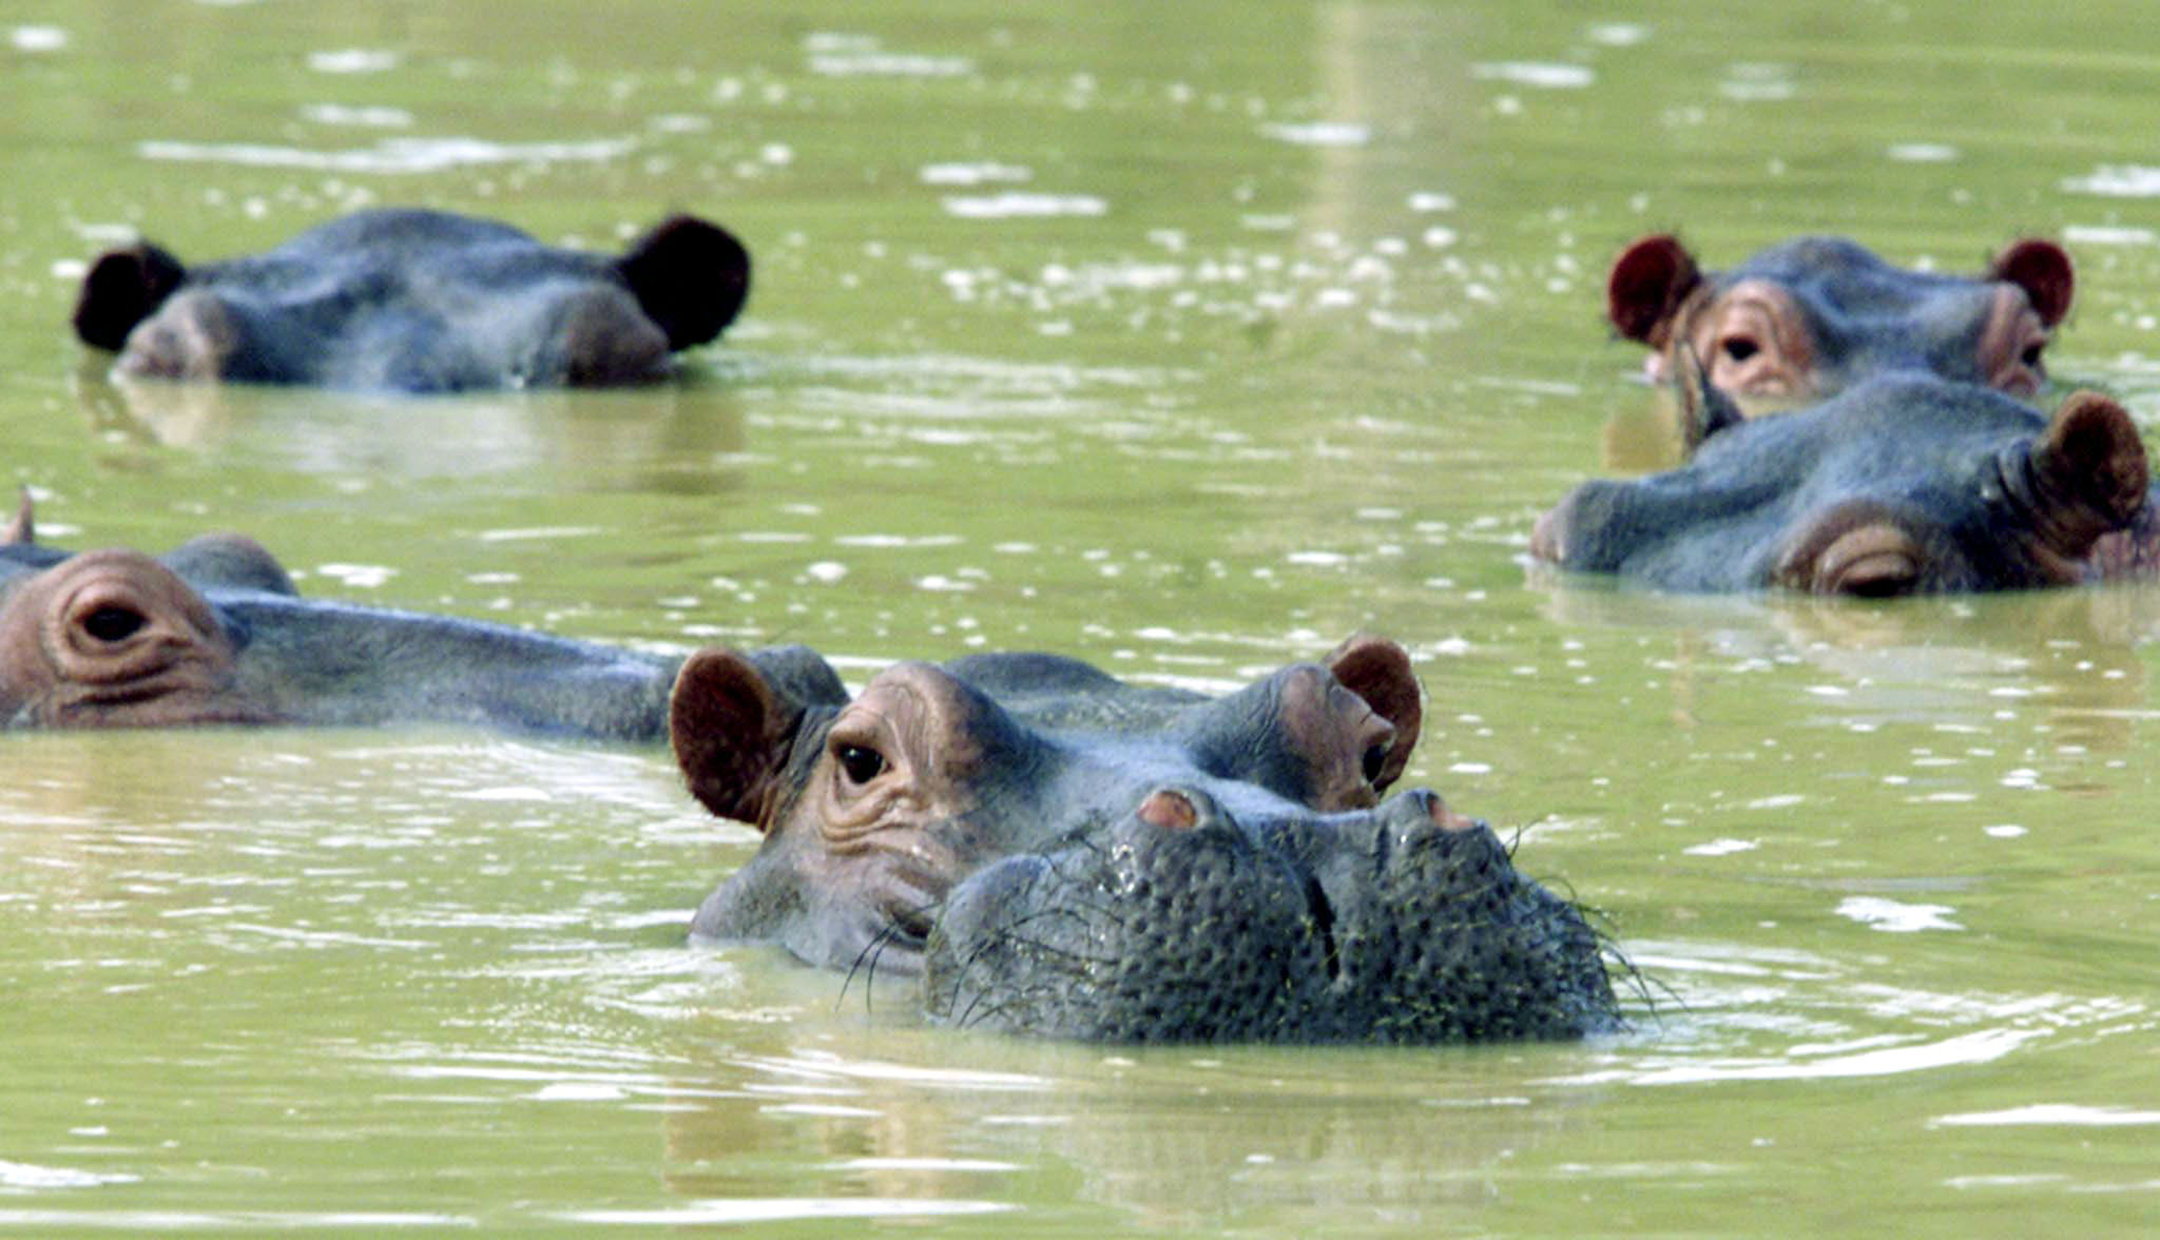 A herd of hippopotamuses swim in a muddy lake at the abandoned country home of former drug kingpin Pablo Escobar